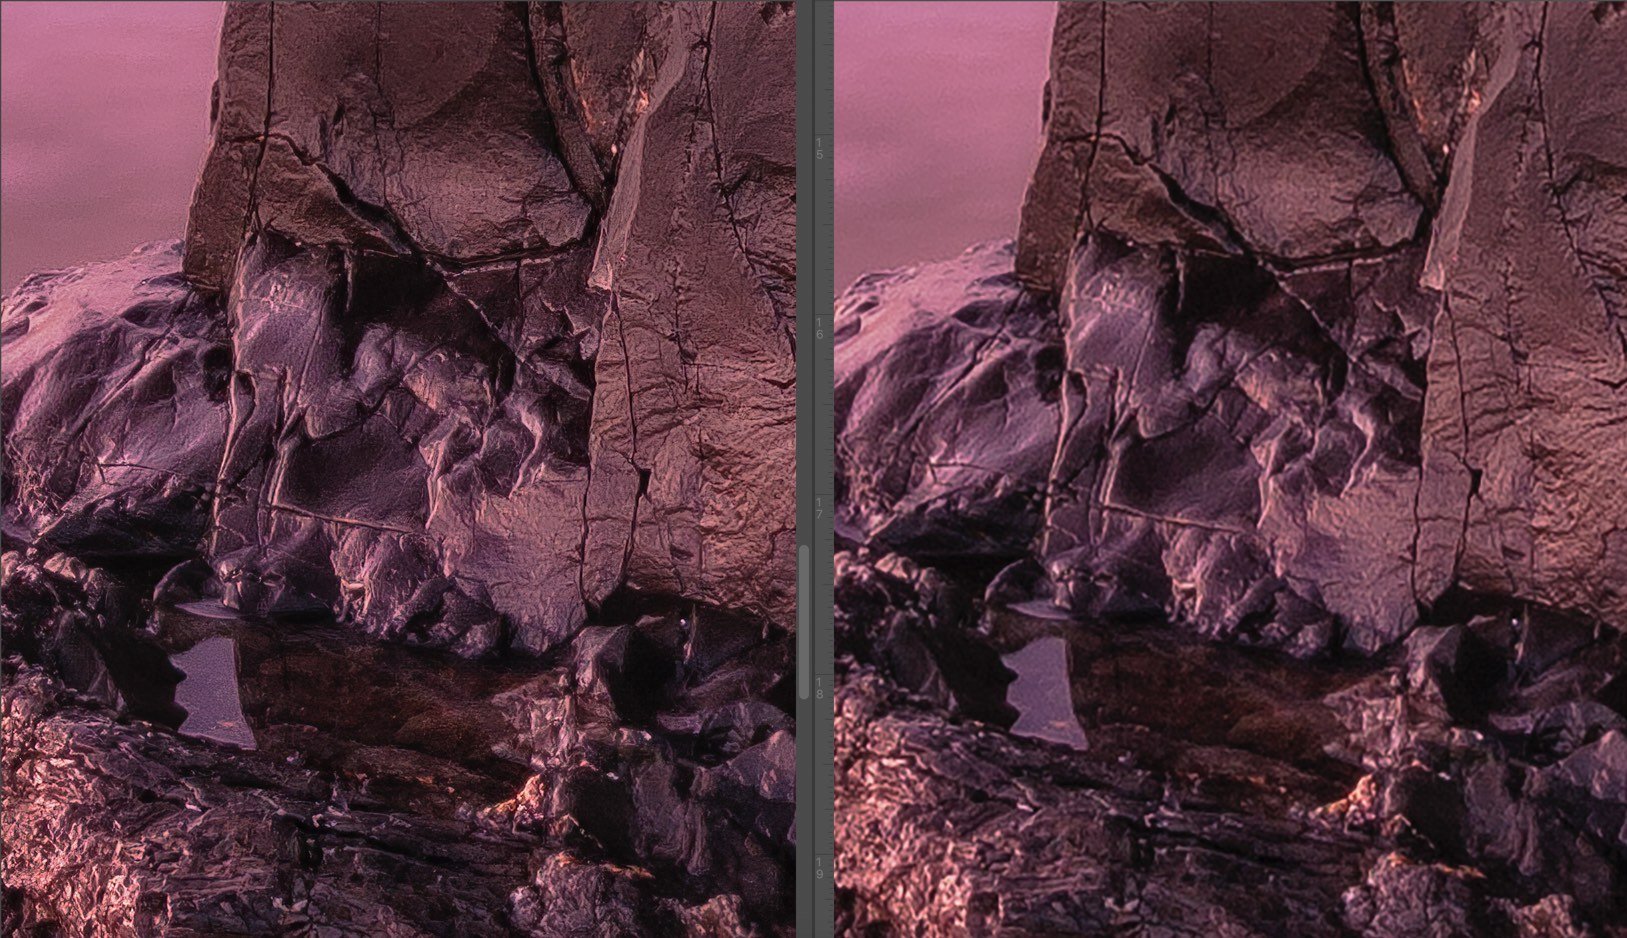 Gigapixel enlargement side by side with Photoshop